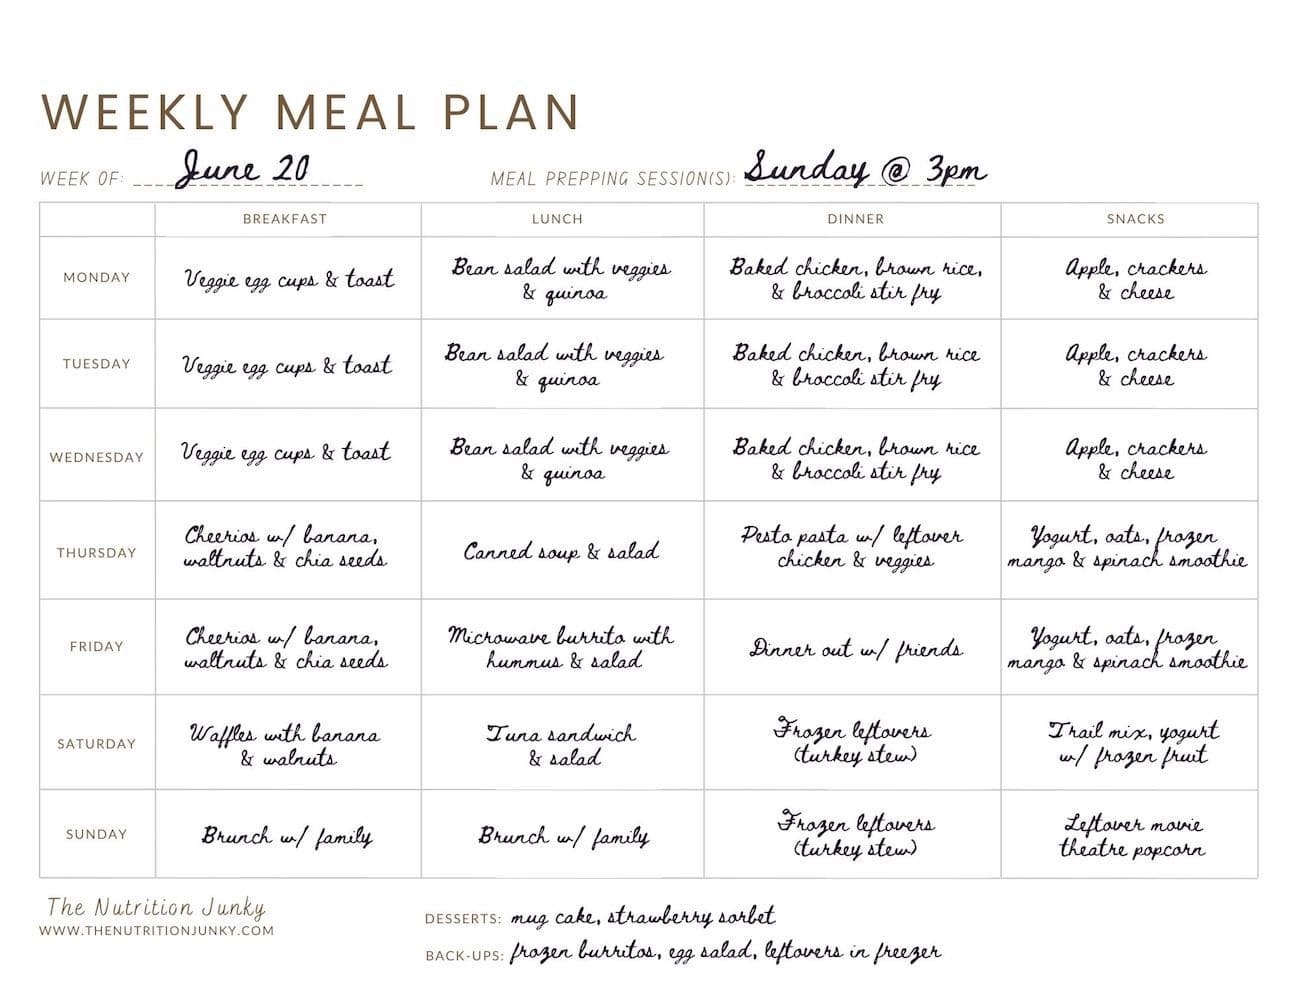 ADHD Meal Planning Guide [Weekly Planner PDF] | The Nutrition Junky